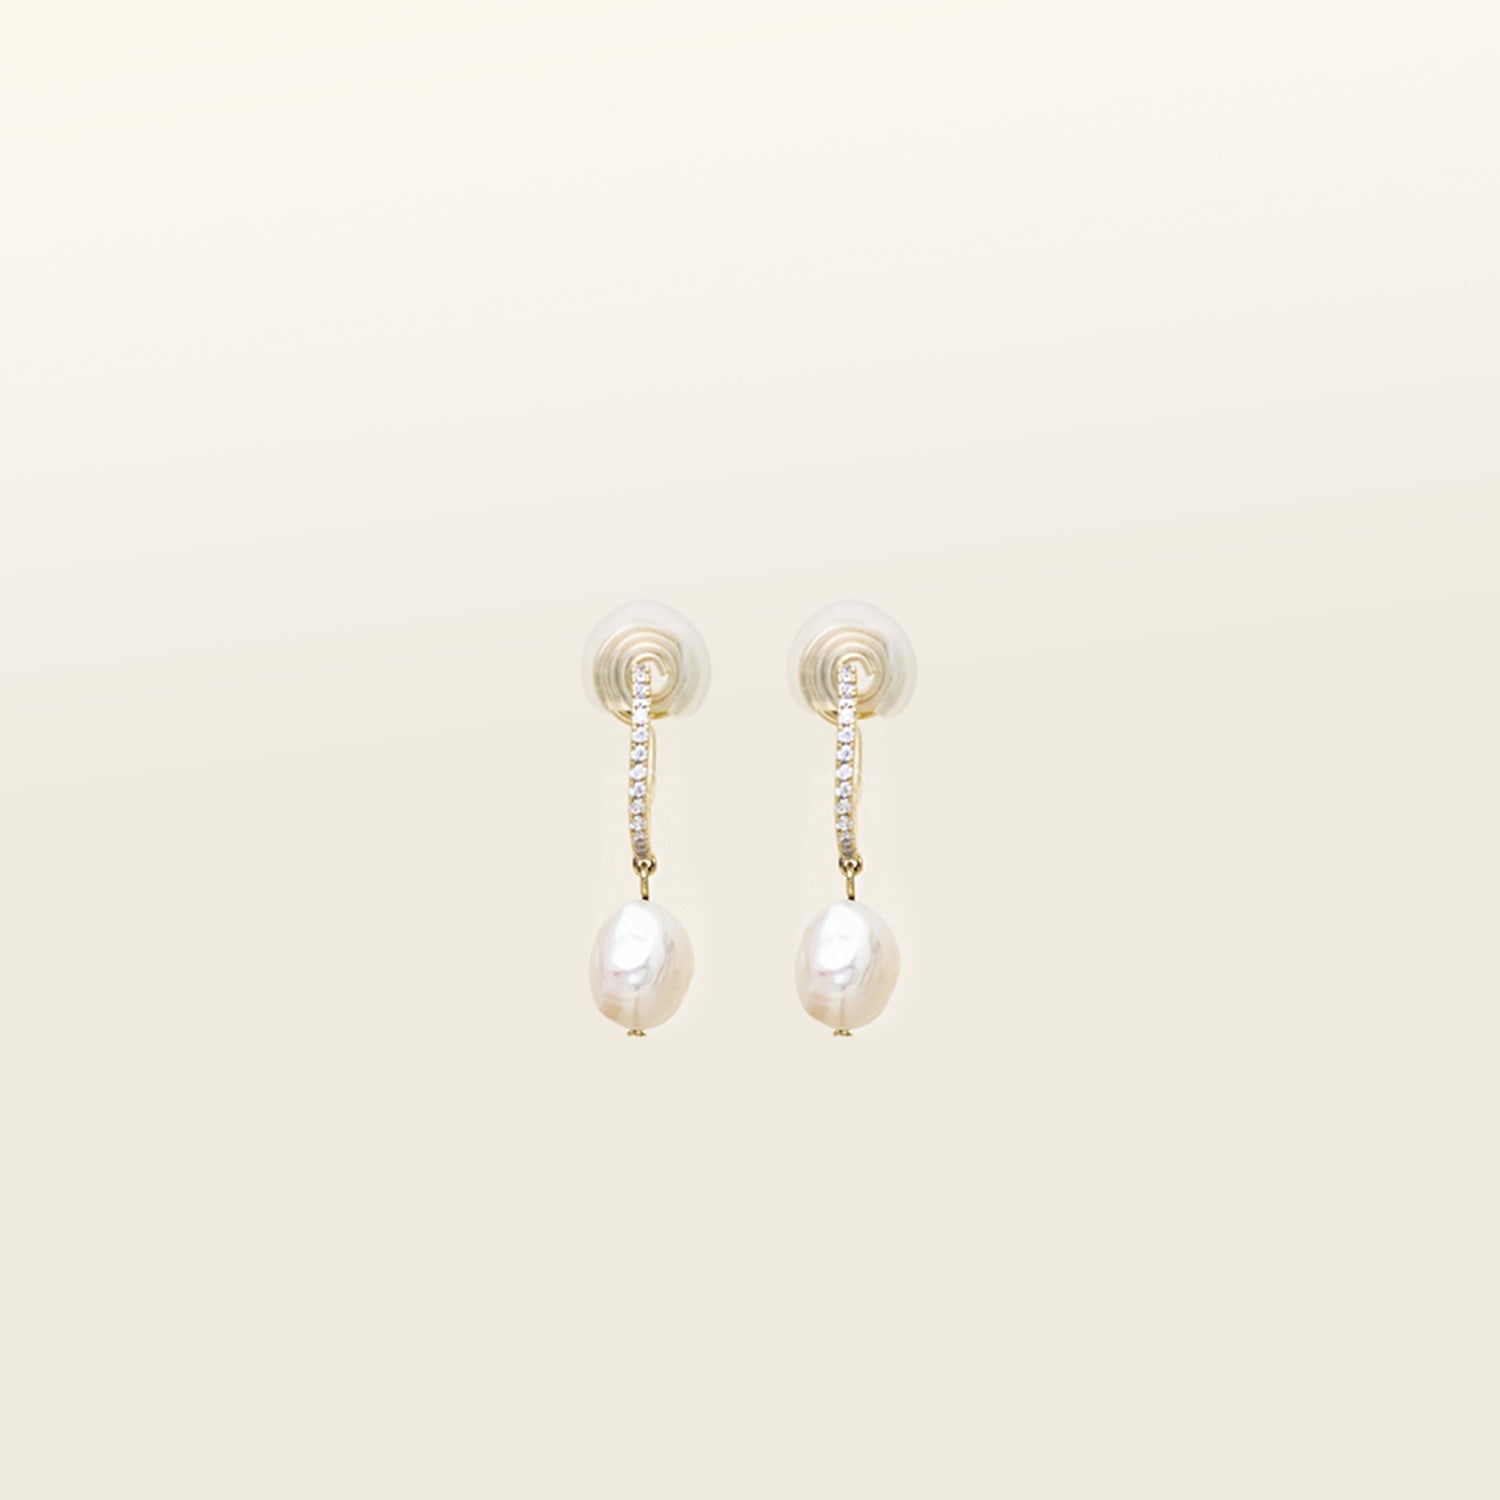 Image of the Pearl Pavé Huggie Clip-On Earrings in Gold offer a secure yet adjustable hold with an average comfortable wear duration of 24 hours. Featuring high-quality Freshwater Pearls and 18K Gold Plated Stainless Steel, these earrings are ideal for all ear types and sizes. Each piece may vary slightly in size and color.